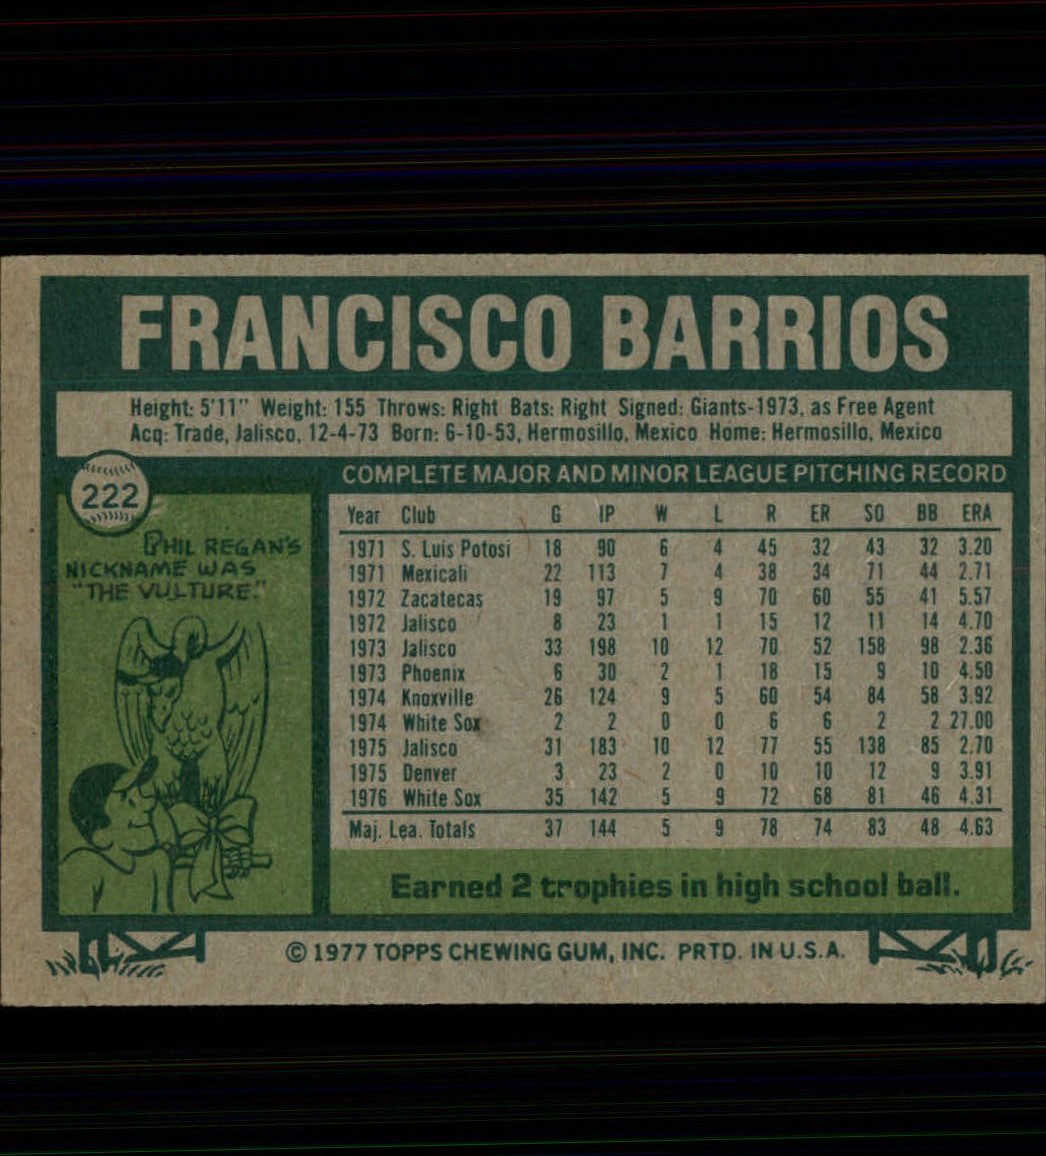 1977 Topps #222 Francisco Barrios RC back image